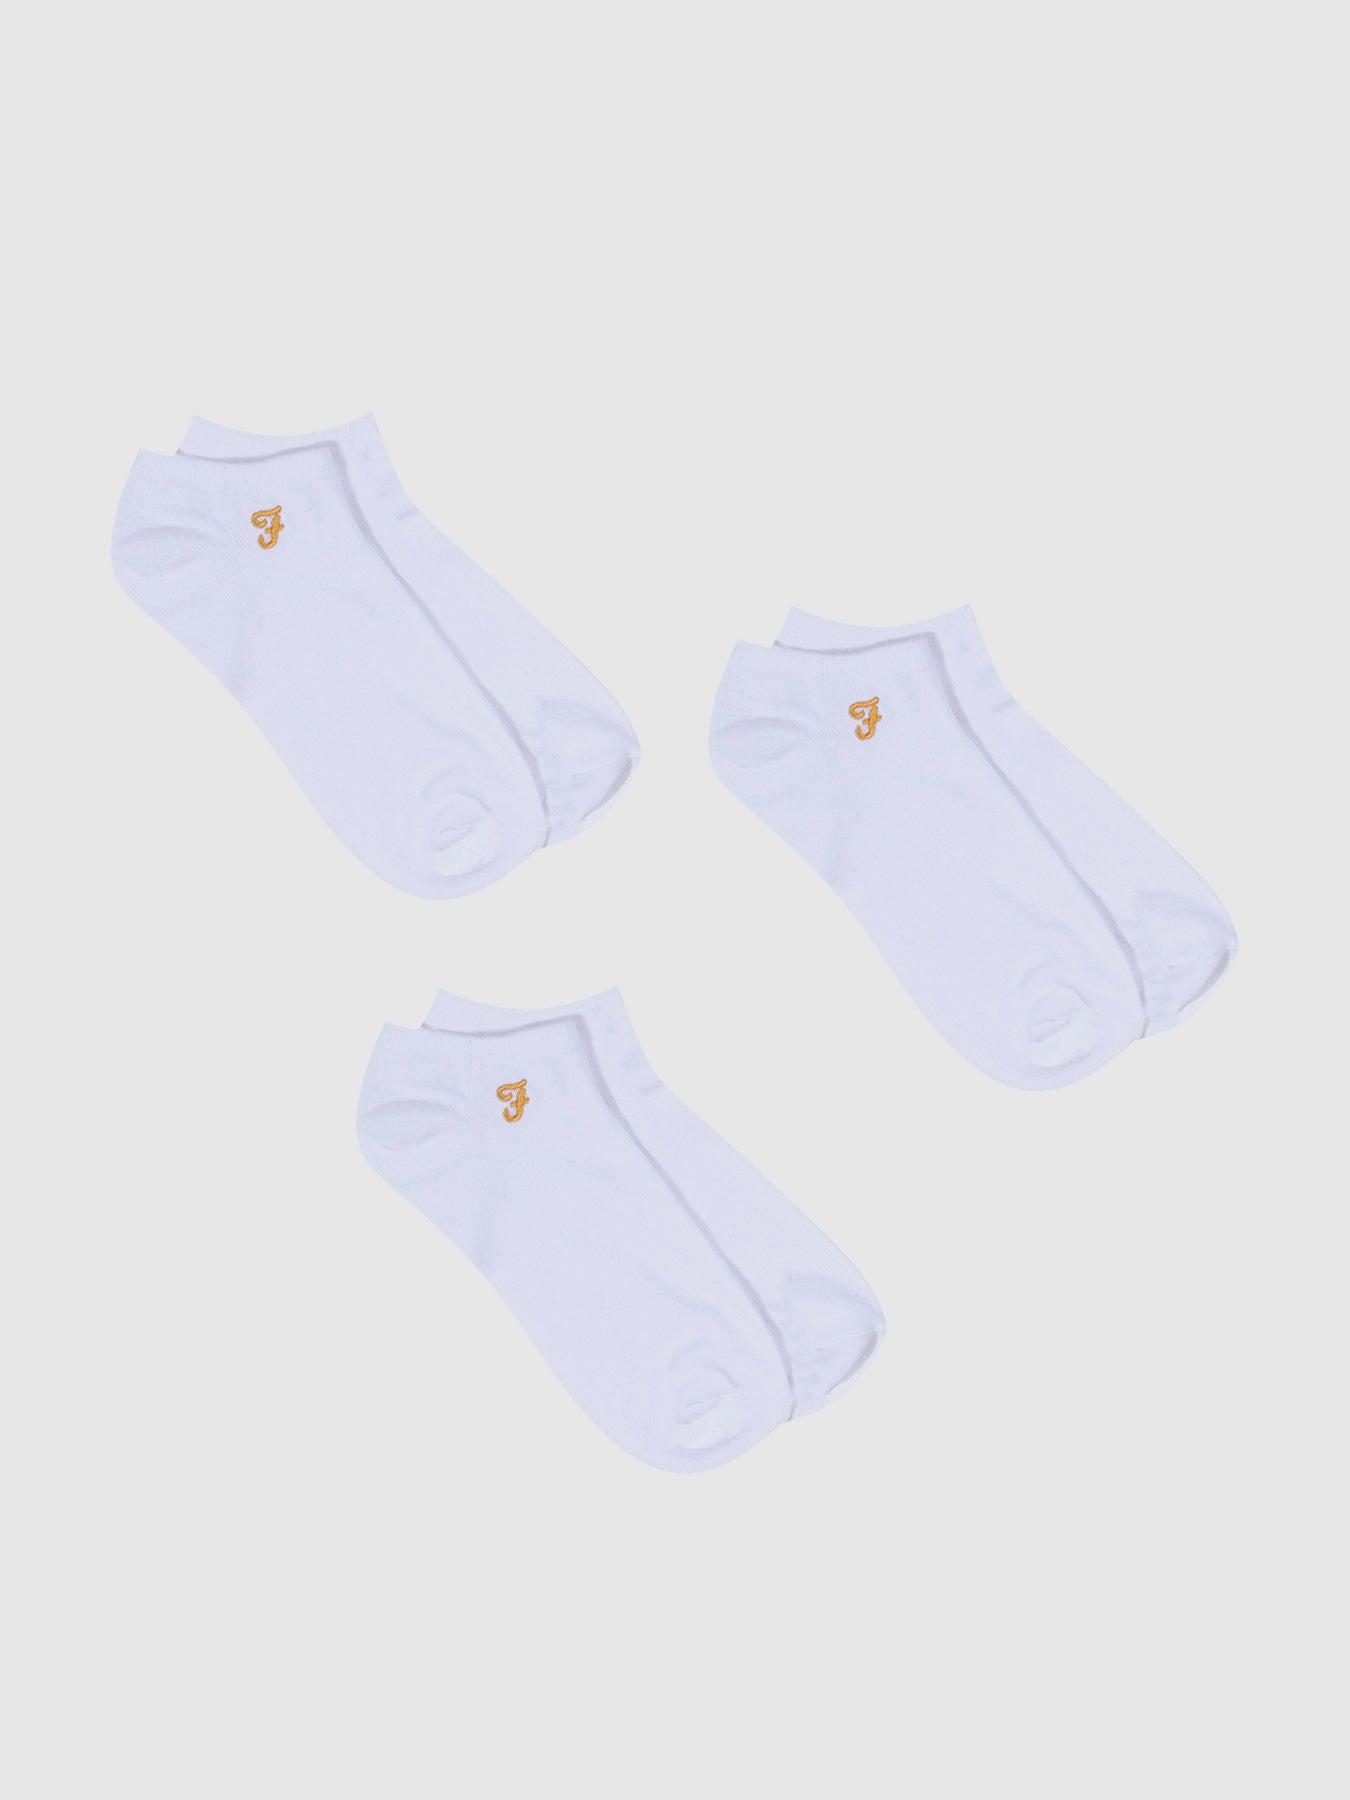 View 3 Pack Lined Socks In White information